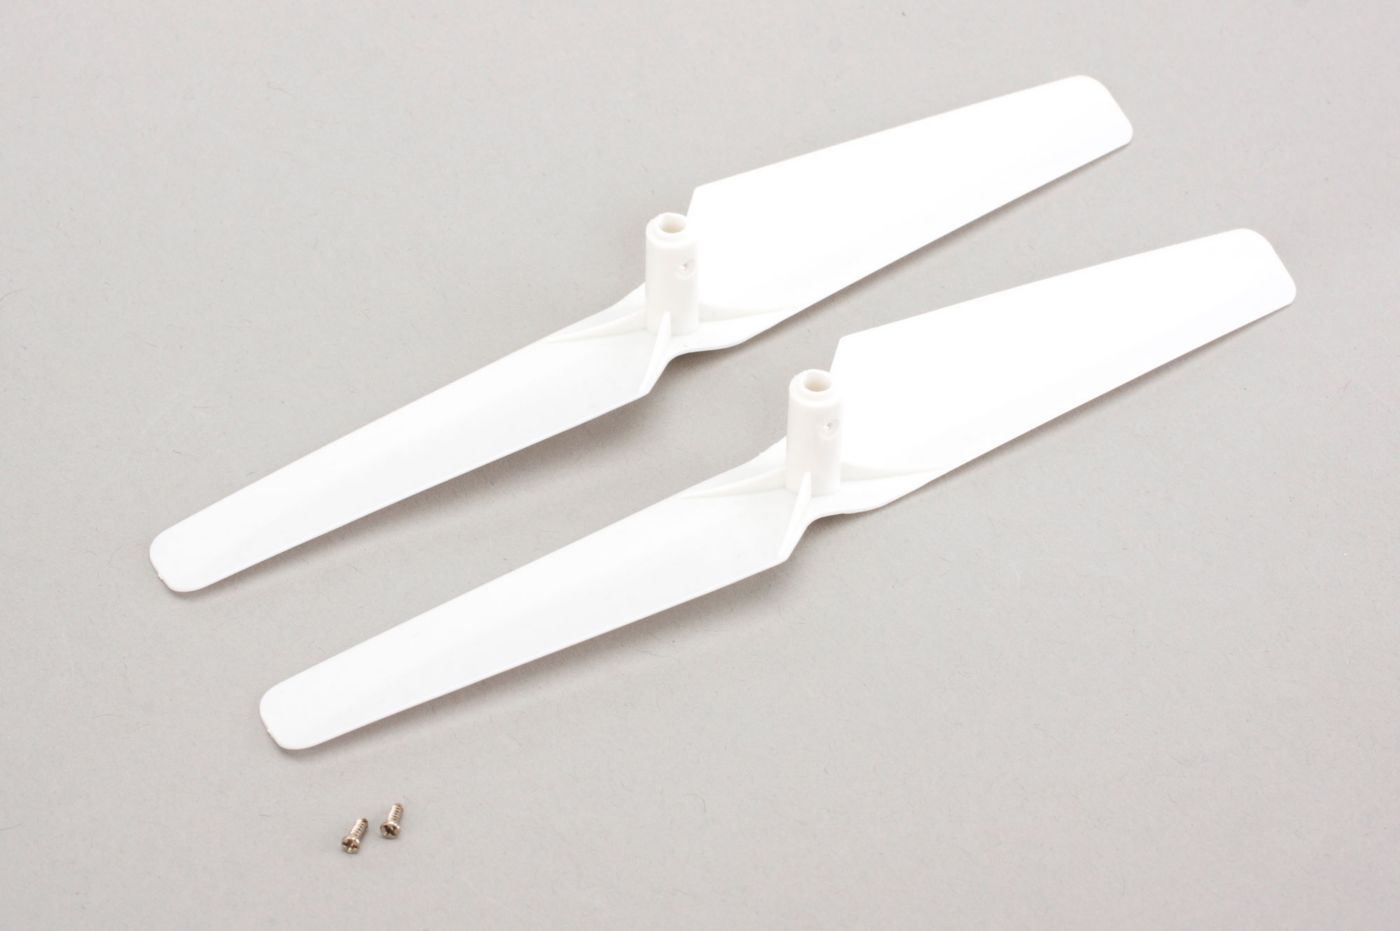 Blade White Propeller, Counter-Clockwise Rotation: mQX